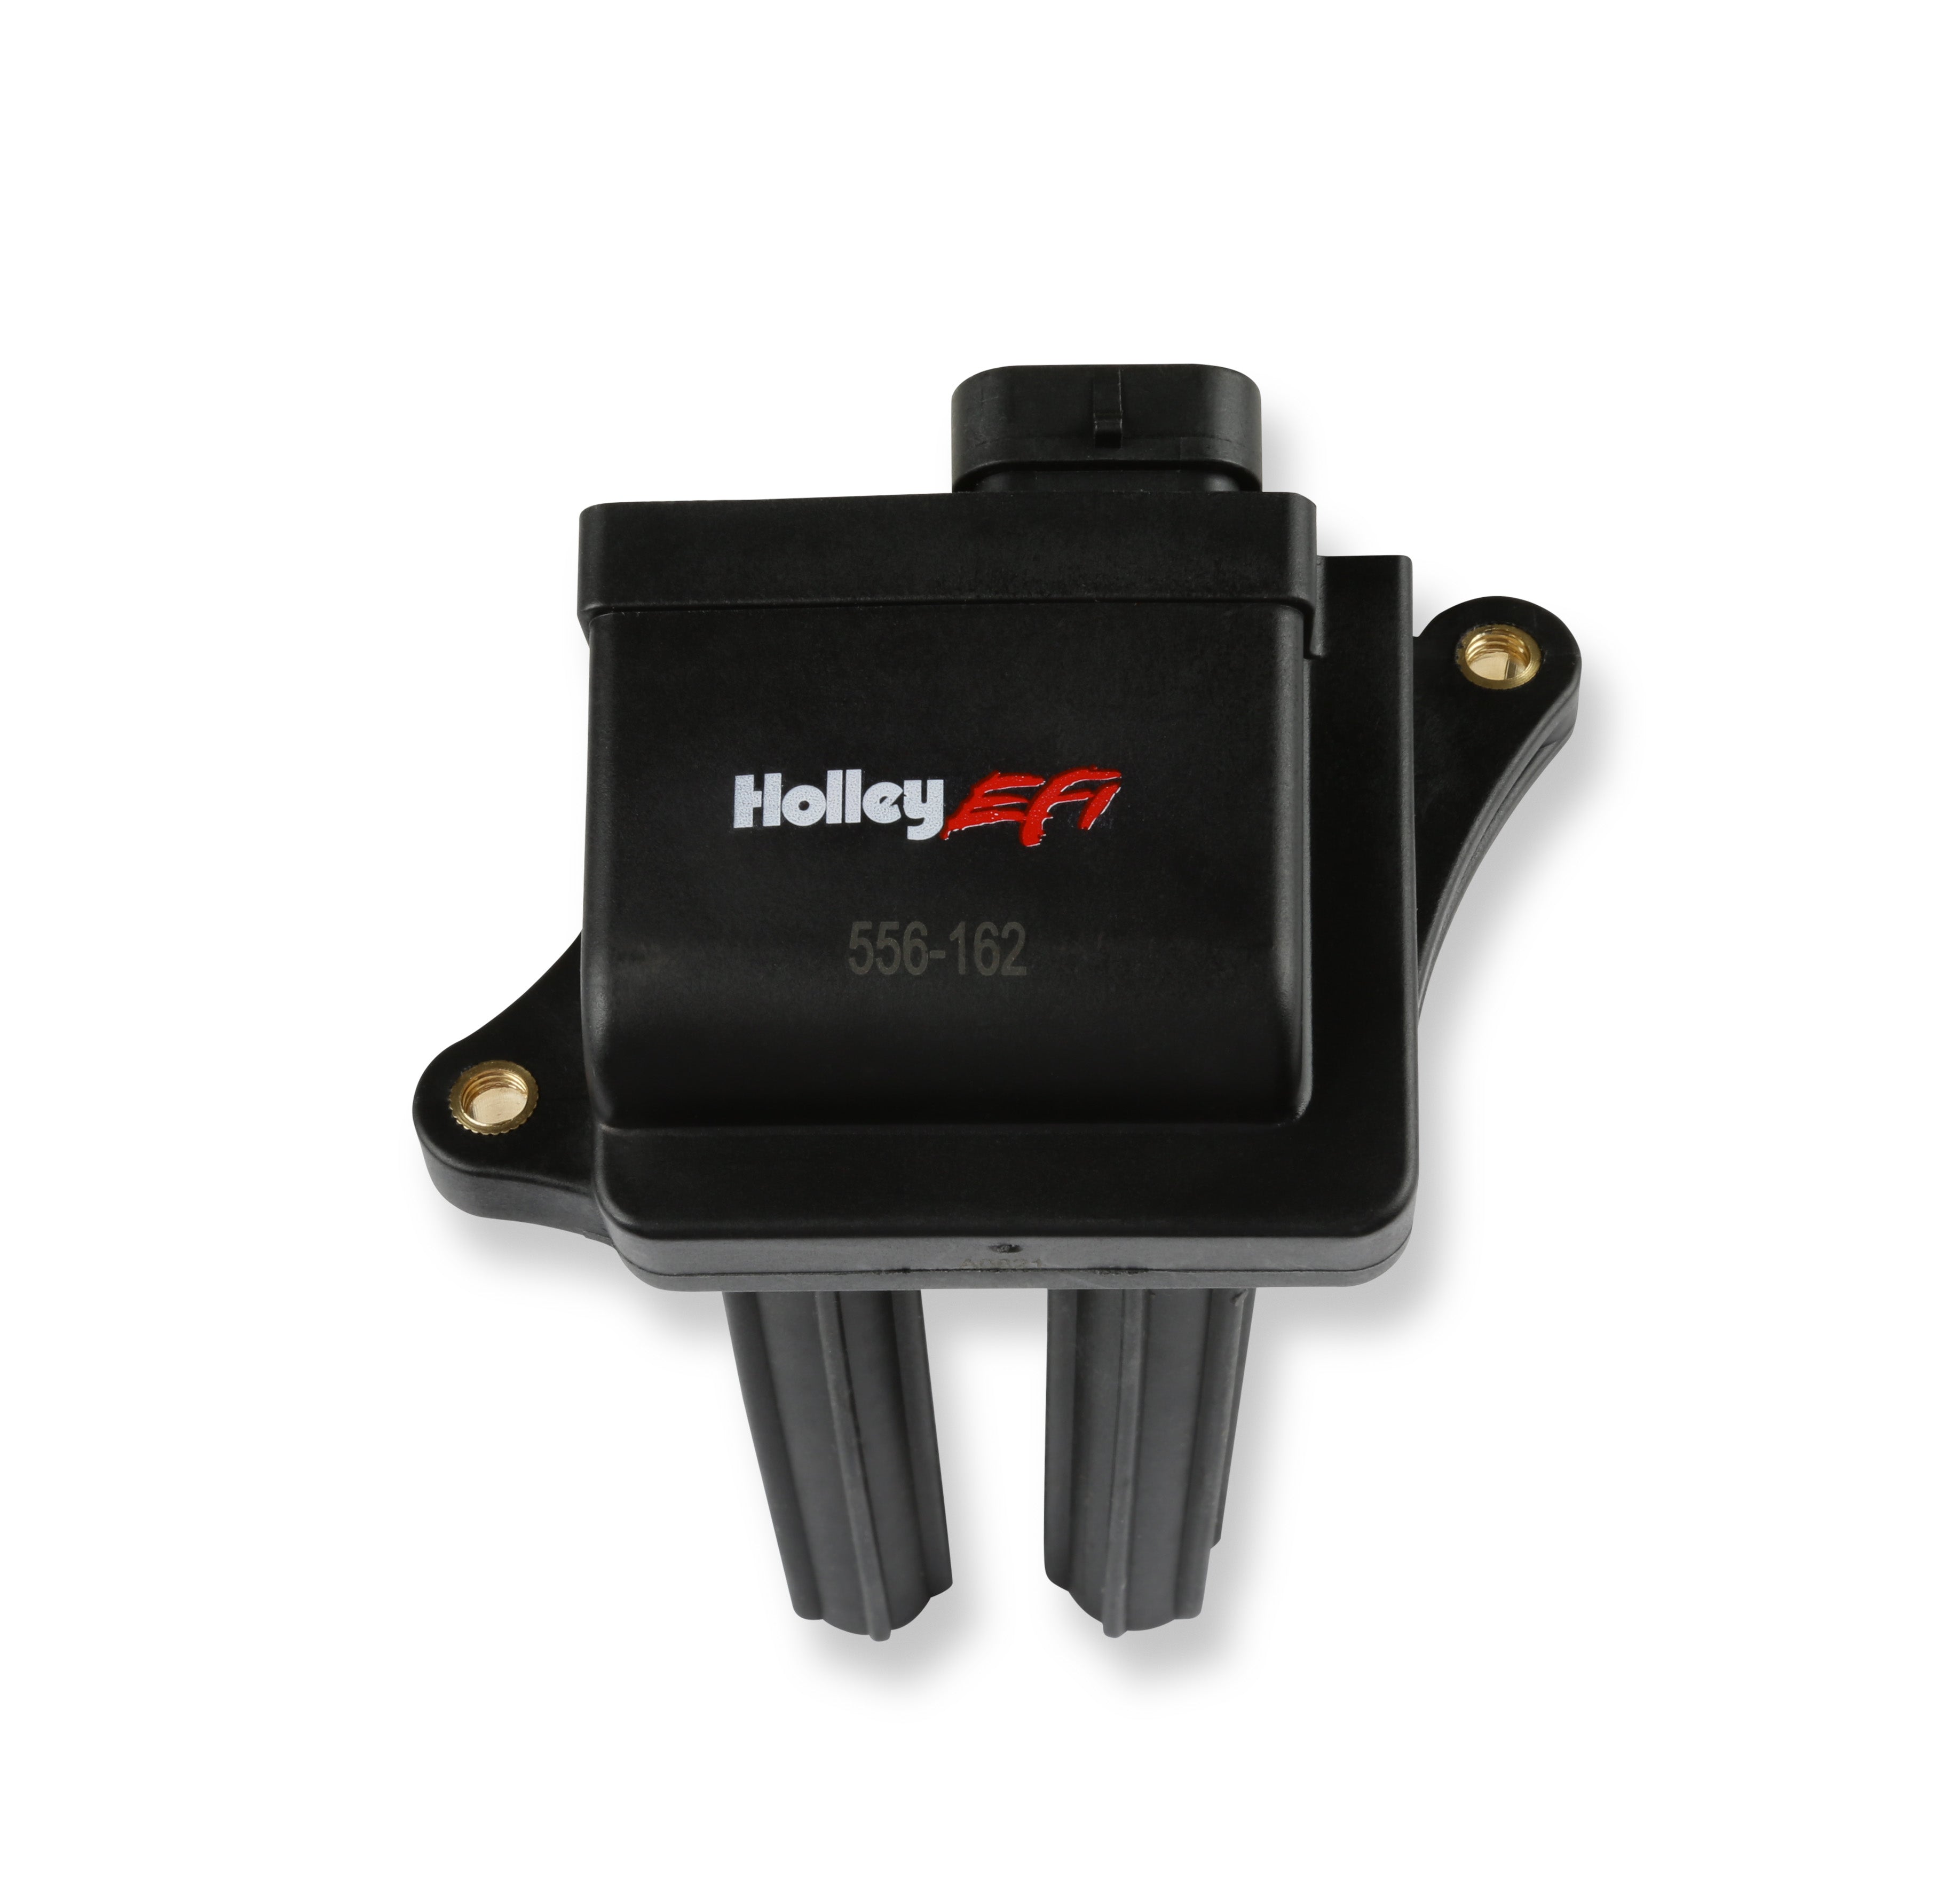 Holley EFI Ignition Coil 556-162